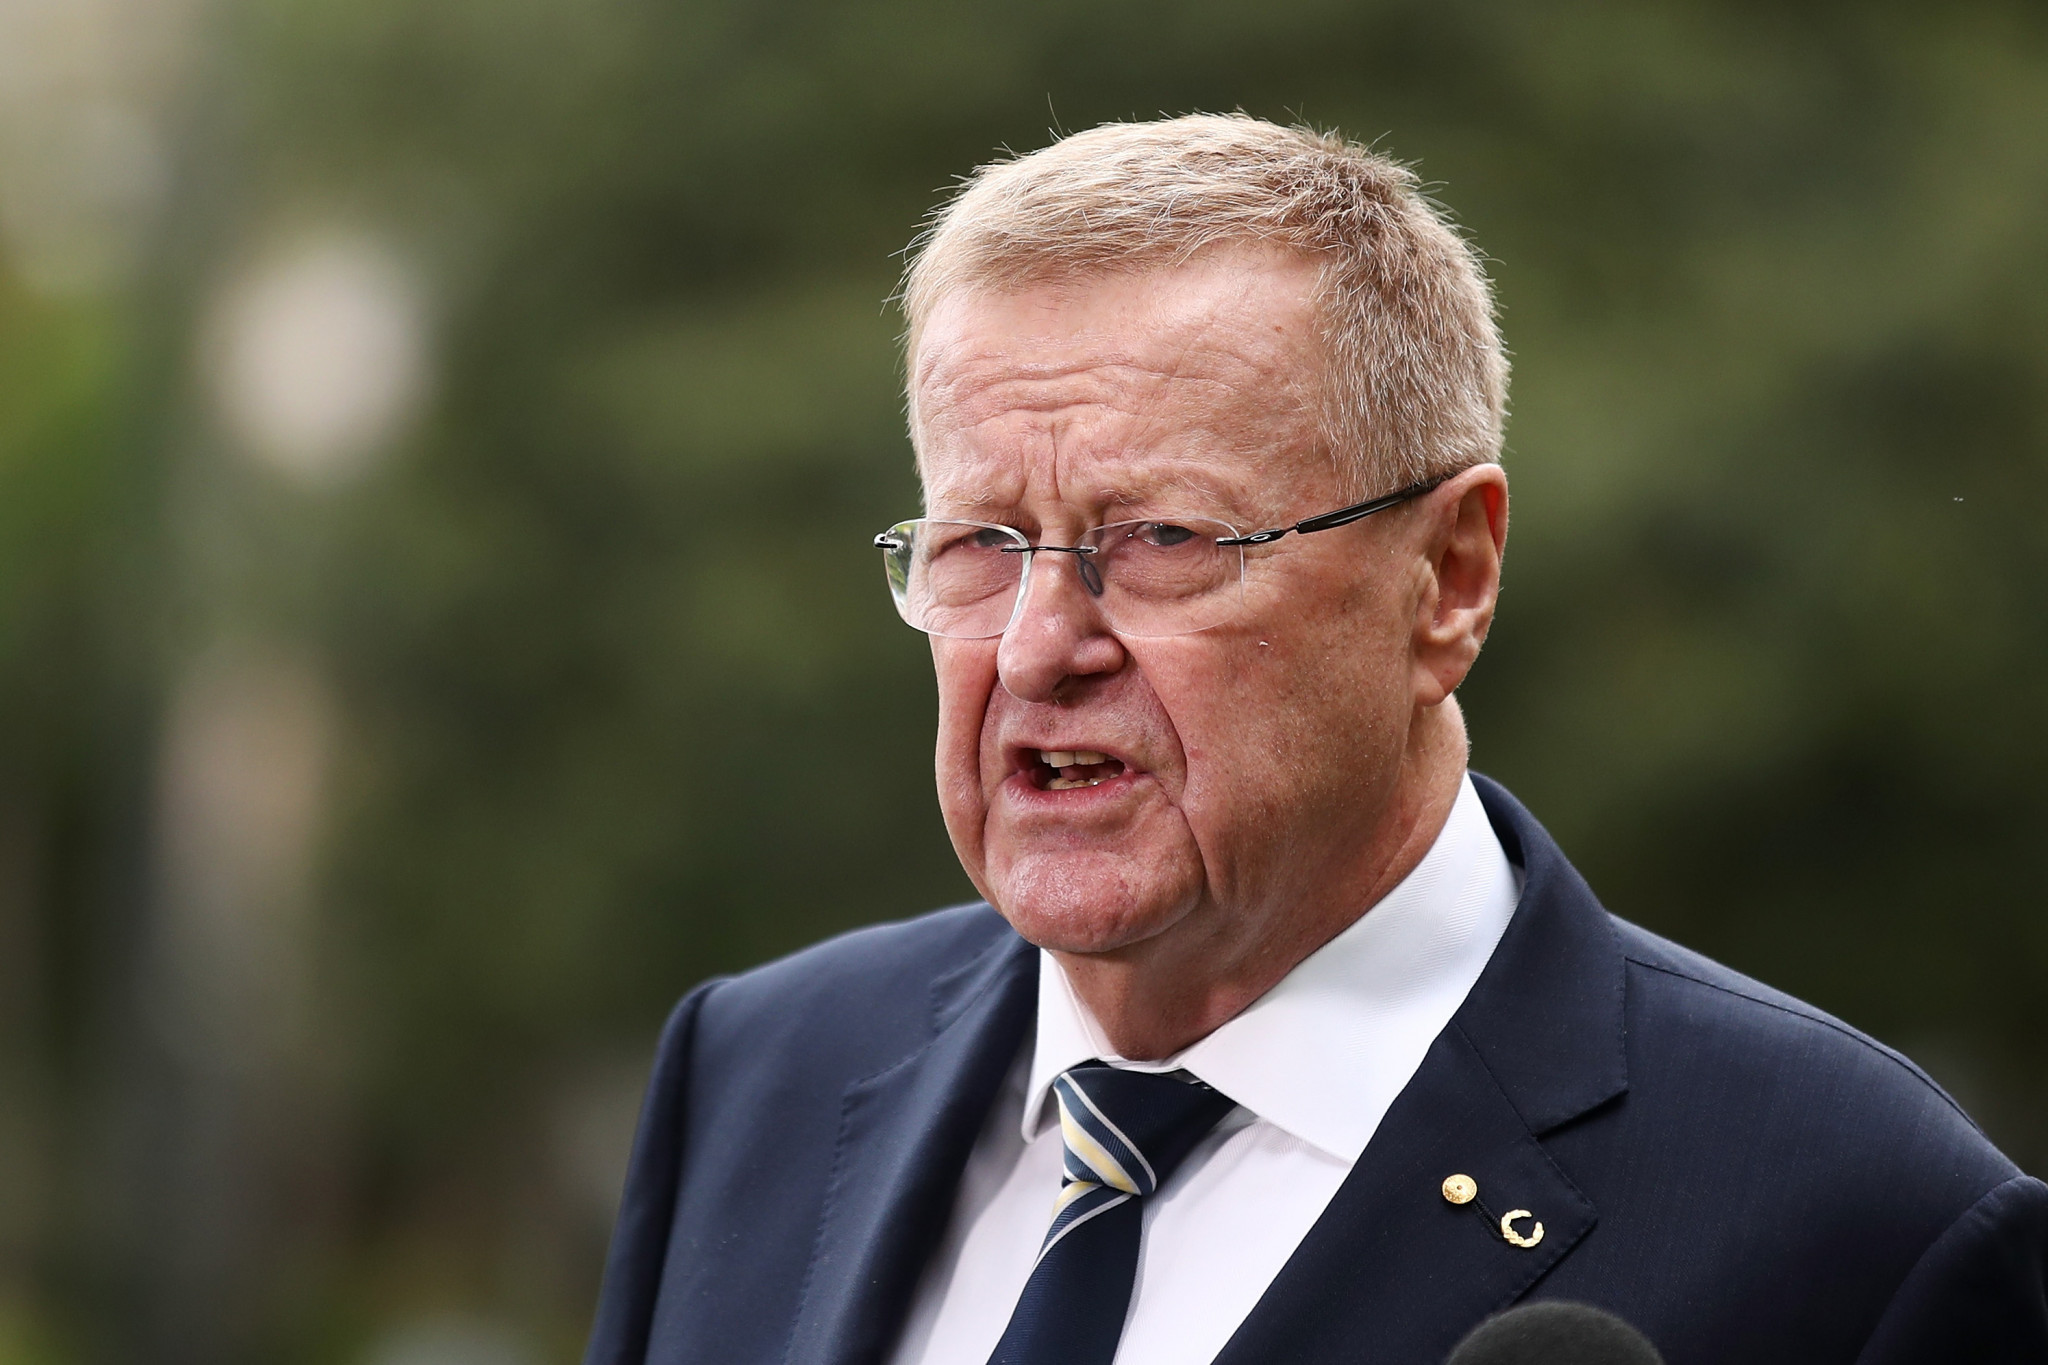 John Coates believes the struggle of some countries to control coronavirus poses problems for Tokyo 2020 ©Getty Images